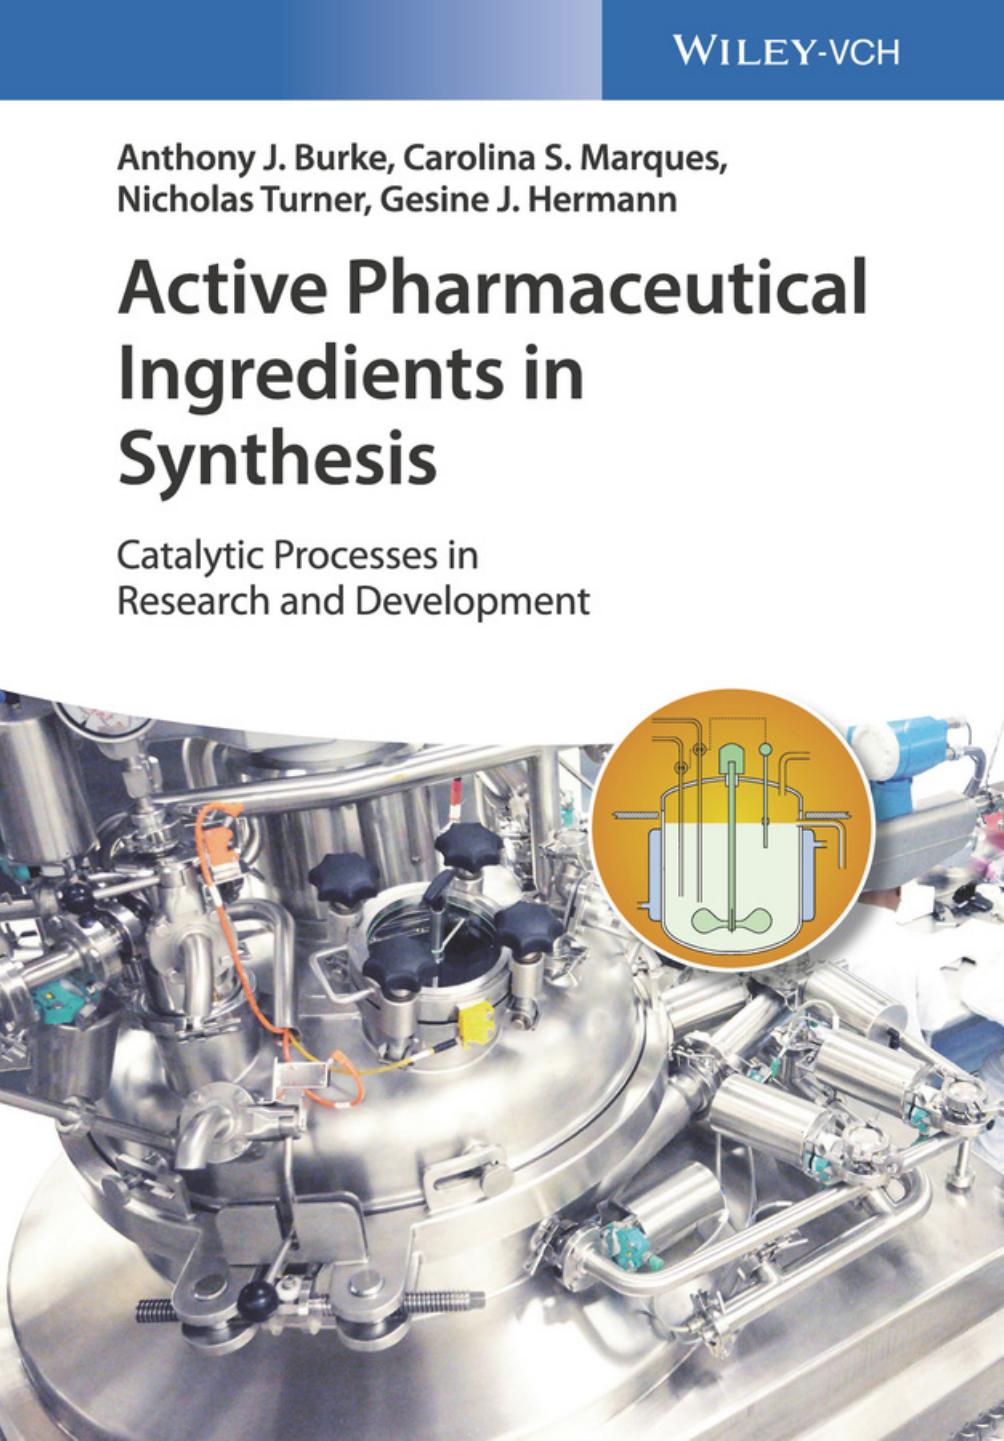 Active Pharmaceutical Ingredients in Synthesis: Catalytic Processes in Research and Development